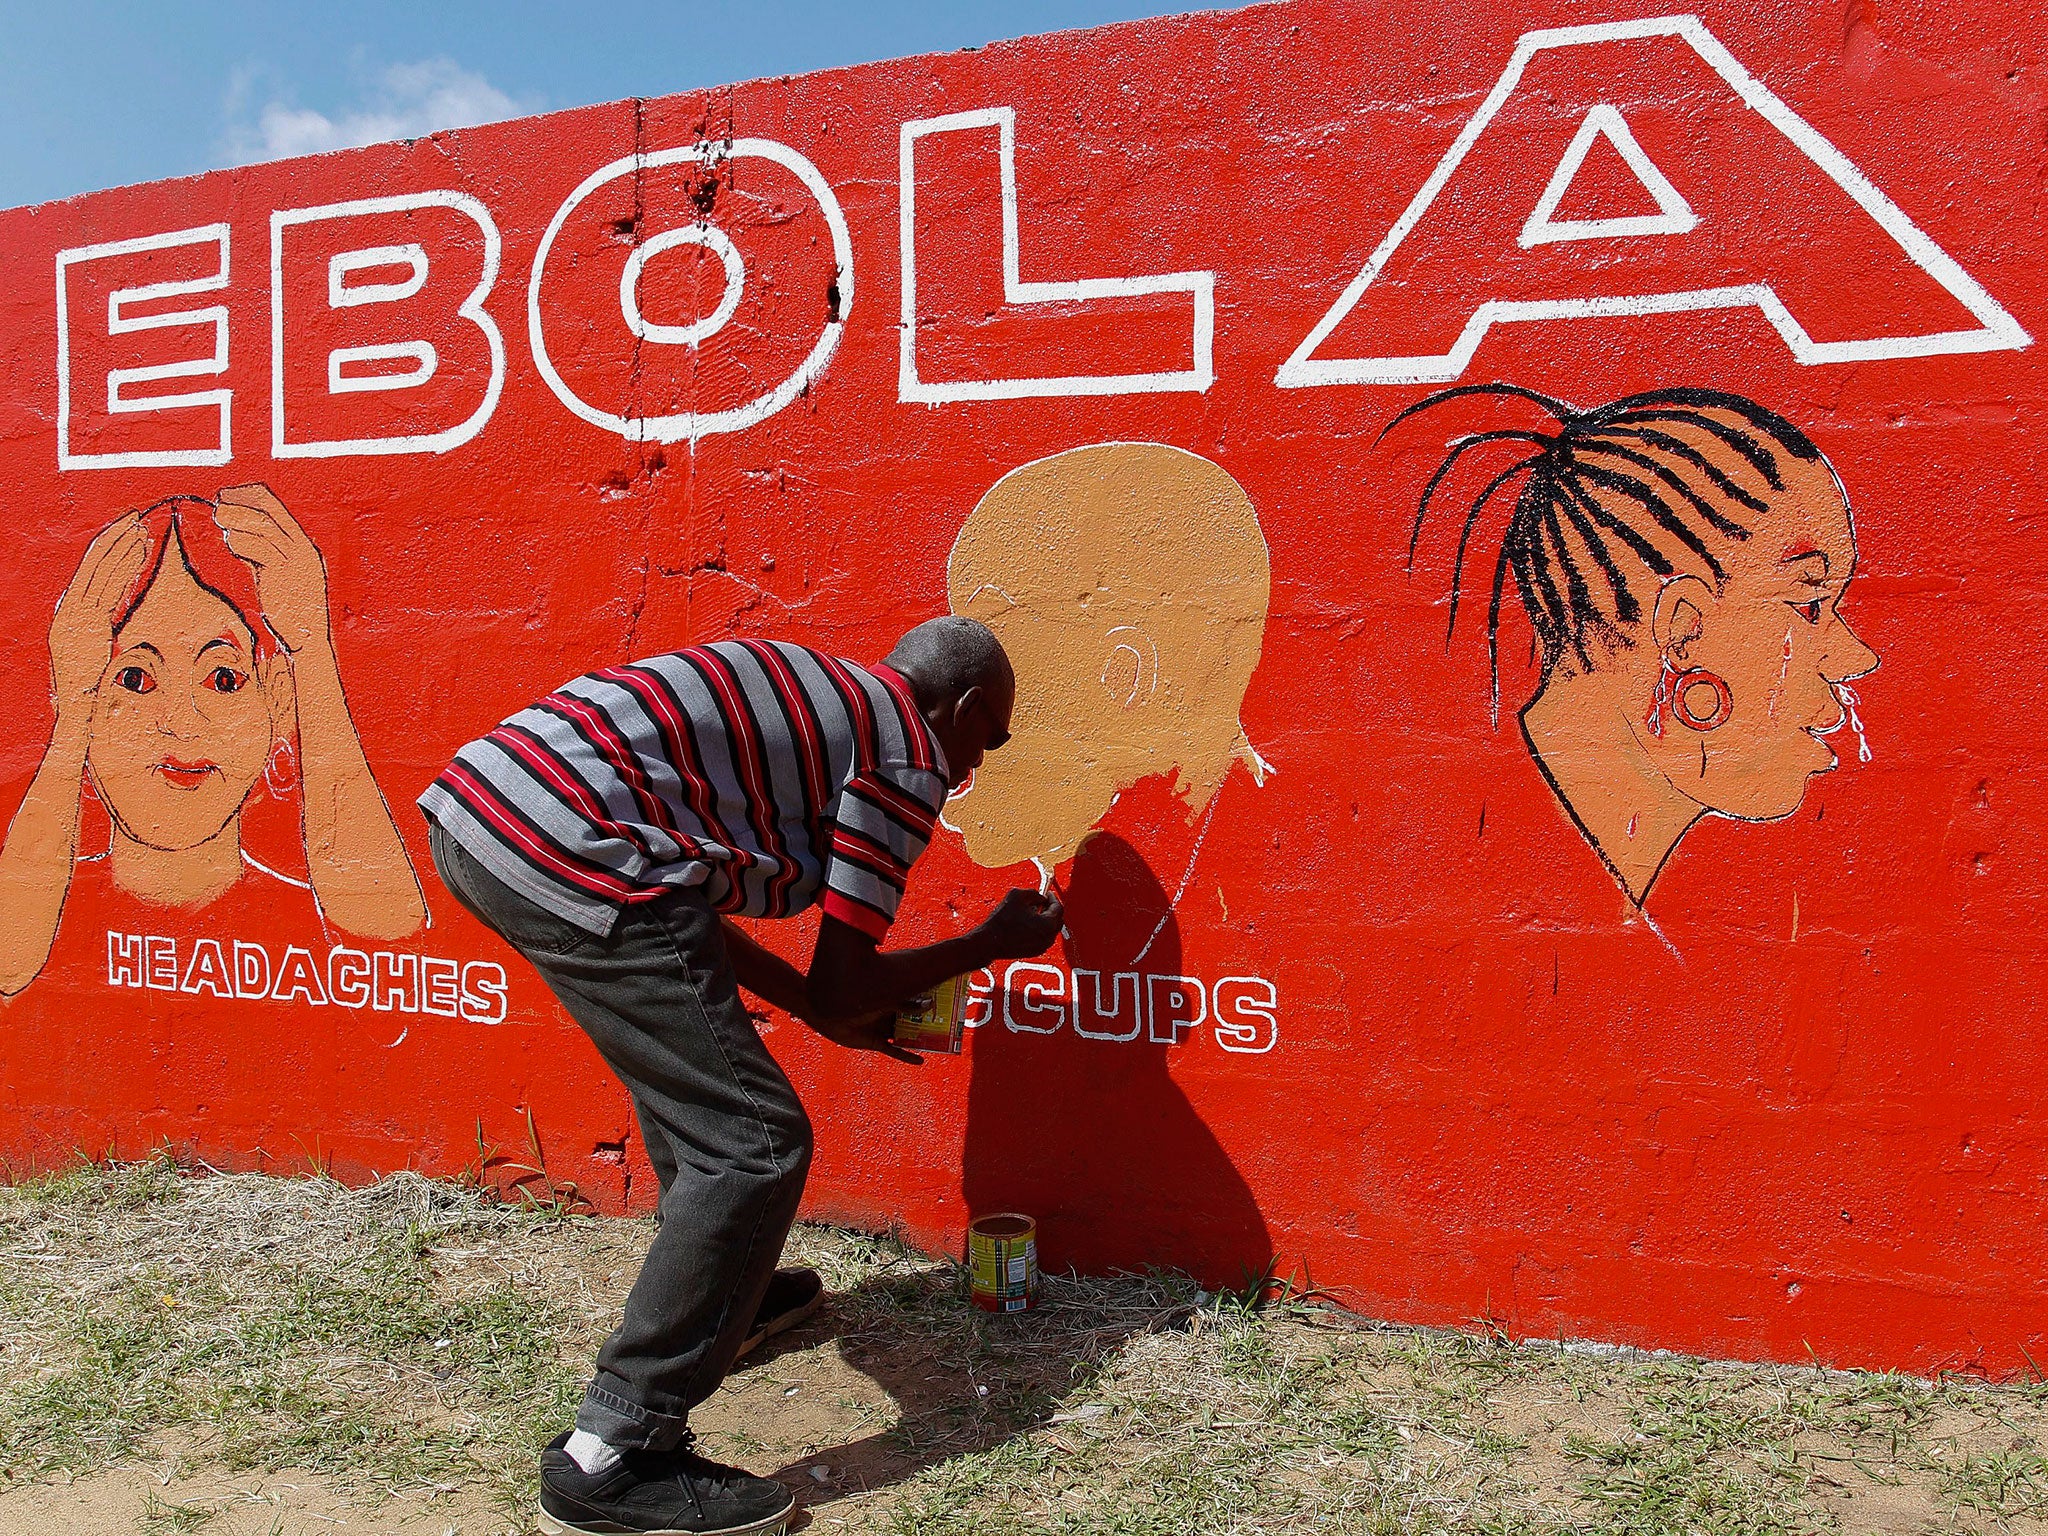 A Liberian man paints on a wall as part of a sensitization programme about the deadly Ebola virus in Monrovia, Liberia. The World Health Organization (WHO) has said the number of deaths from Ebola has risen to 2100 in West Africa with an exponential surge